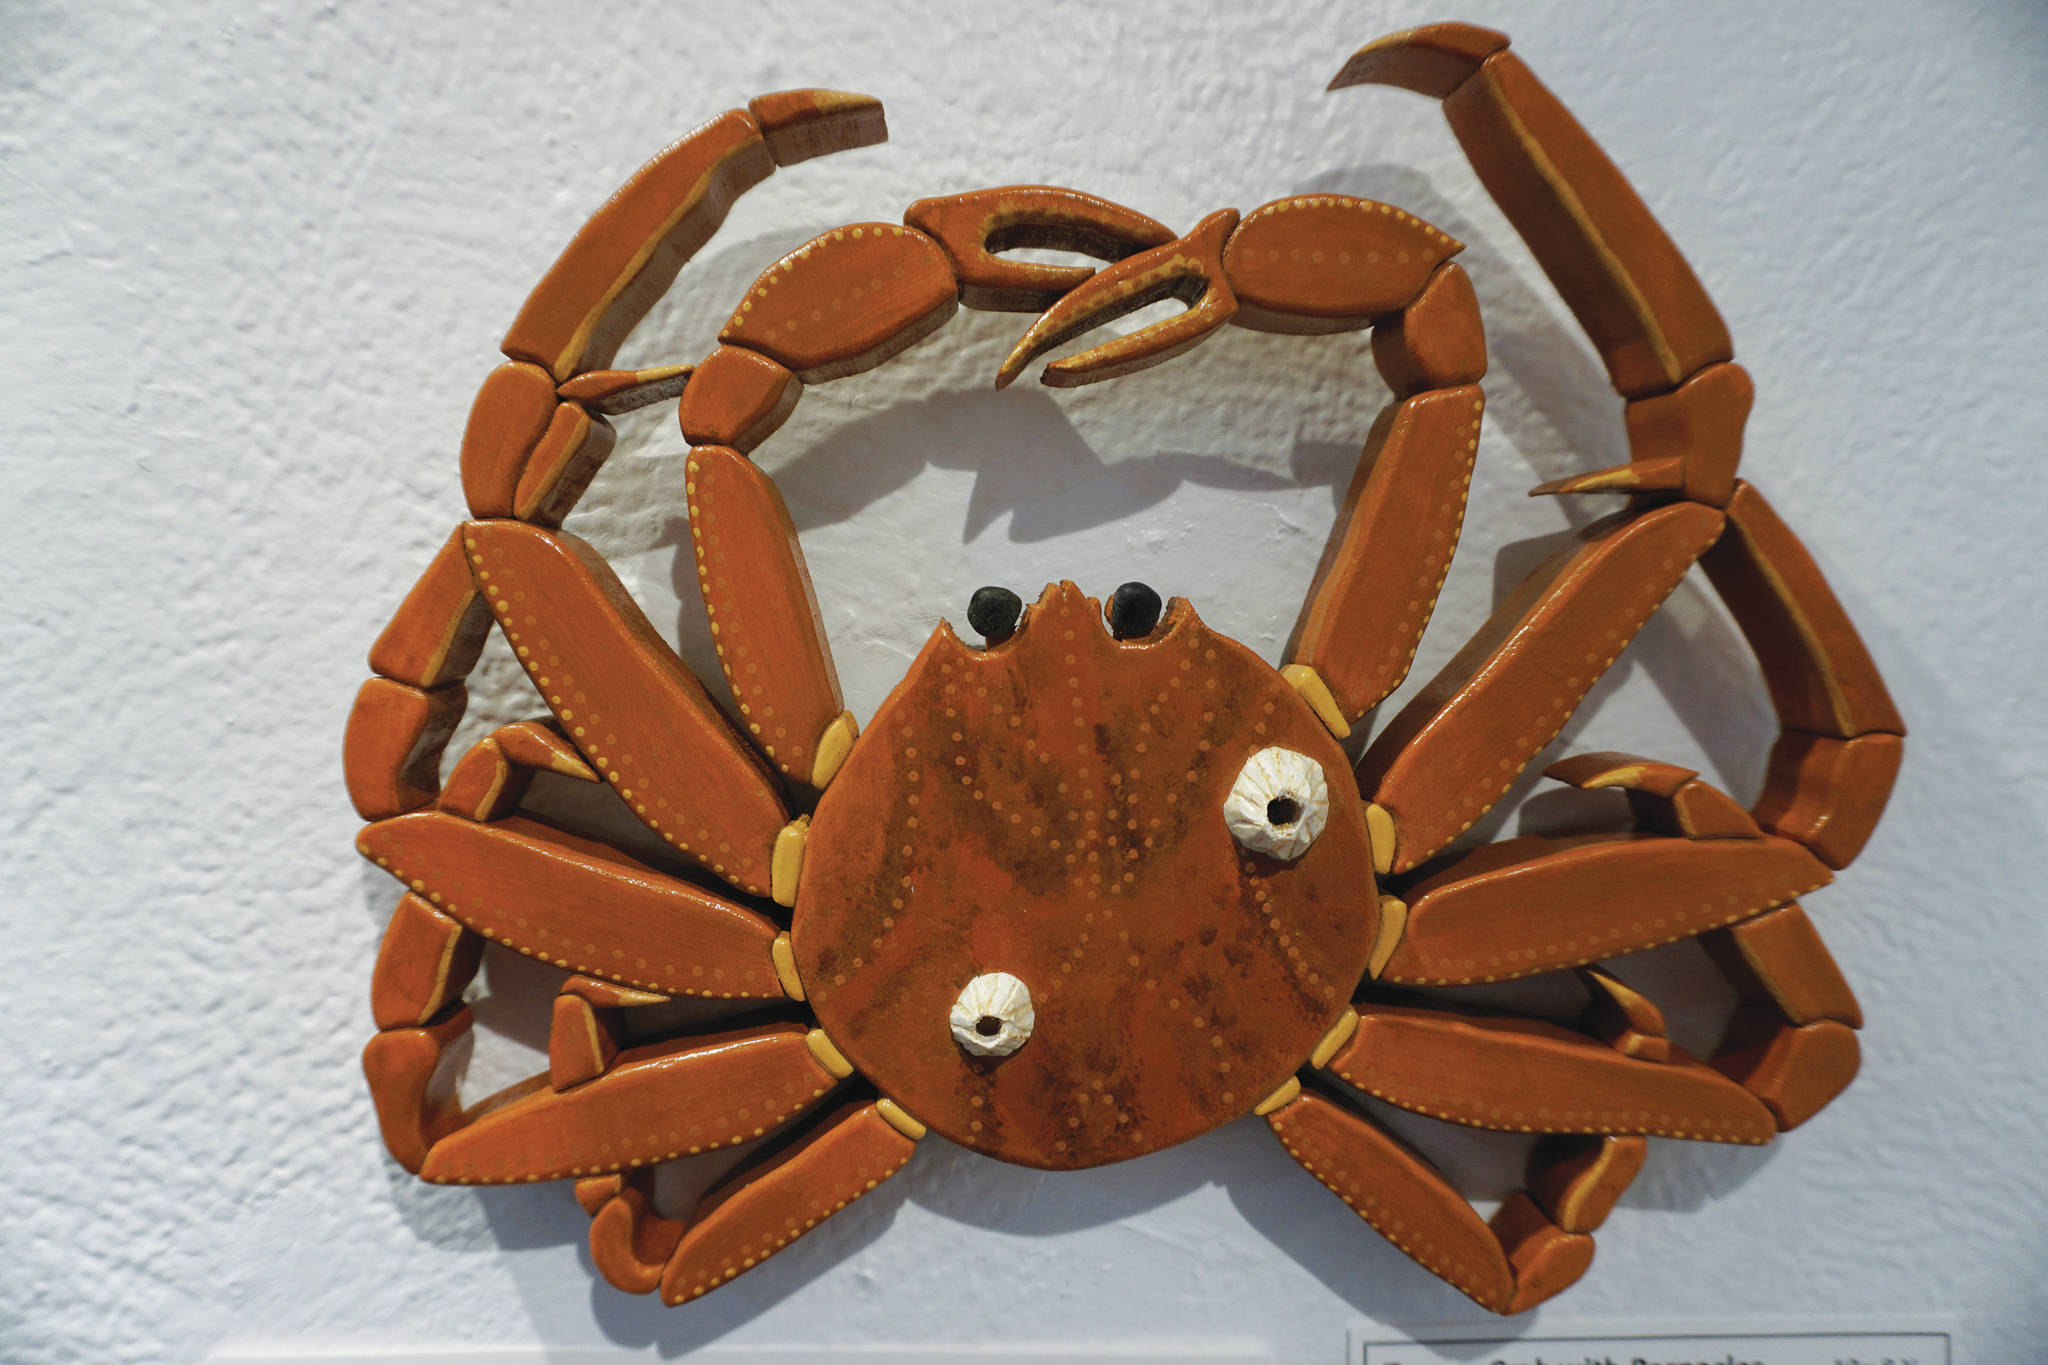 Michael Armstrong / Homer News
“Tanner Crab with Barnacles” is one of the wood sculptural pieces in Kim Schuster’s exhibit, “Science Observed Through Art: Unsung Species,” as seen on Friday at Ptarmigan Arts in Homer.